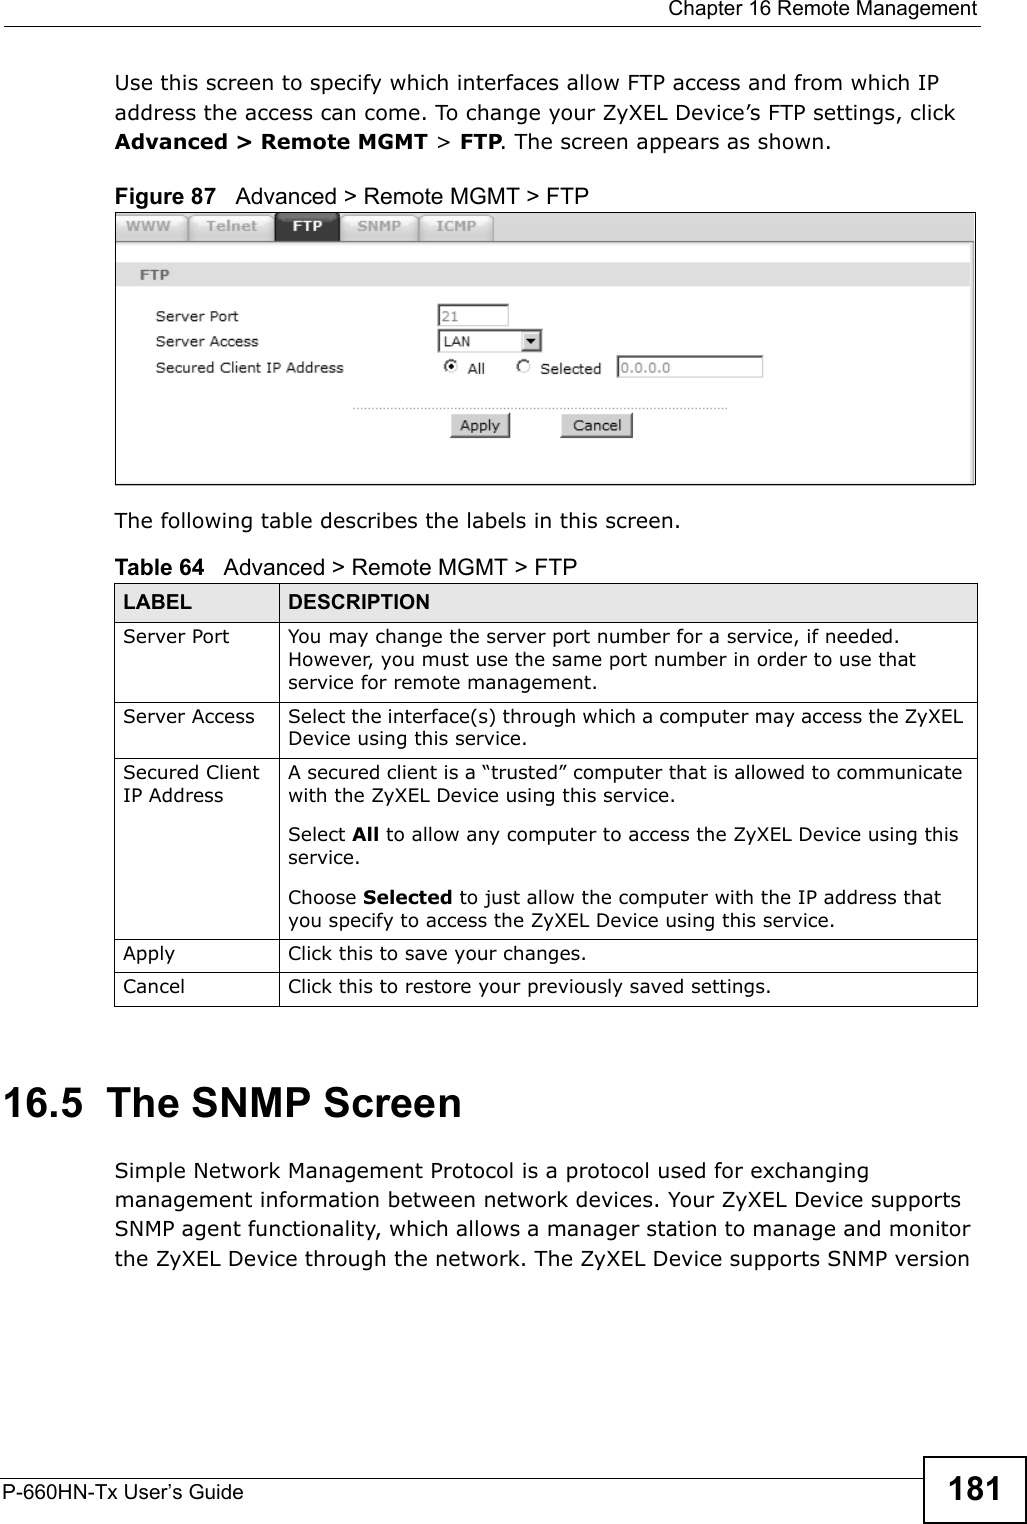  Chapter 16 Remote ManagementP-660HN-Tx User’s Guide 181Use this screen to specify which interfaces allow FTP access and from which IP address the access can come. To change your ZyXEL Device’s FTP settings, click Advanced &gt; Remote MGMT &gt; FTP. The screen appears as shown.Figure 87   Advanced &gt; Remote MGMT &gt; FTPThe following table describes the labels in this screen. 16.5  The SNMP ScreenSimple Network Management Protocol is a protocol used for exchanging management information between network devices. Your ZyXEL Device supports SNMP agent functionality, which allows a manager station to manage and monitor the ZyXEL Device through the network. The ZyXEL Device supports SNMP version Table 64   Advanced &gt; Remote MGMT &gt; FTPLABEL DESCRIPTIONServer Port You may change the server port number for a service, if needed. However, you must use the same port number in order to use that service for remote management.Server Access Select the interface(s) through which a computer may access the ZyXEL Device using this service.Secured Client IP AddressA secured client is a “trusted” computer that is allowed to communicate with the ZyXEL Device using this service. Select All to allow any computer to access the ZyXEL Device using this service.Choose Selected to just allow the computer with the IP address that you specify to access the ZyXEL Device using this service.Apply Click this to save your changes.Cancel Click this to restore your previously saved settings.